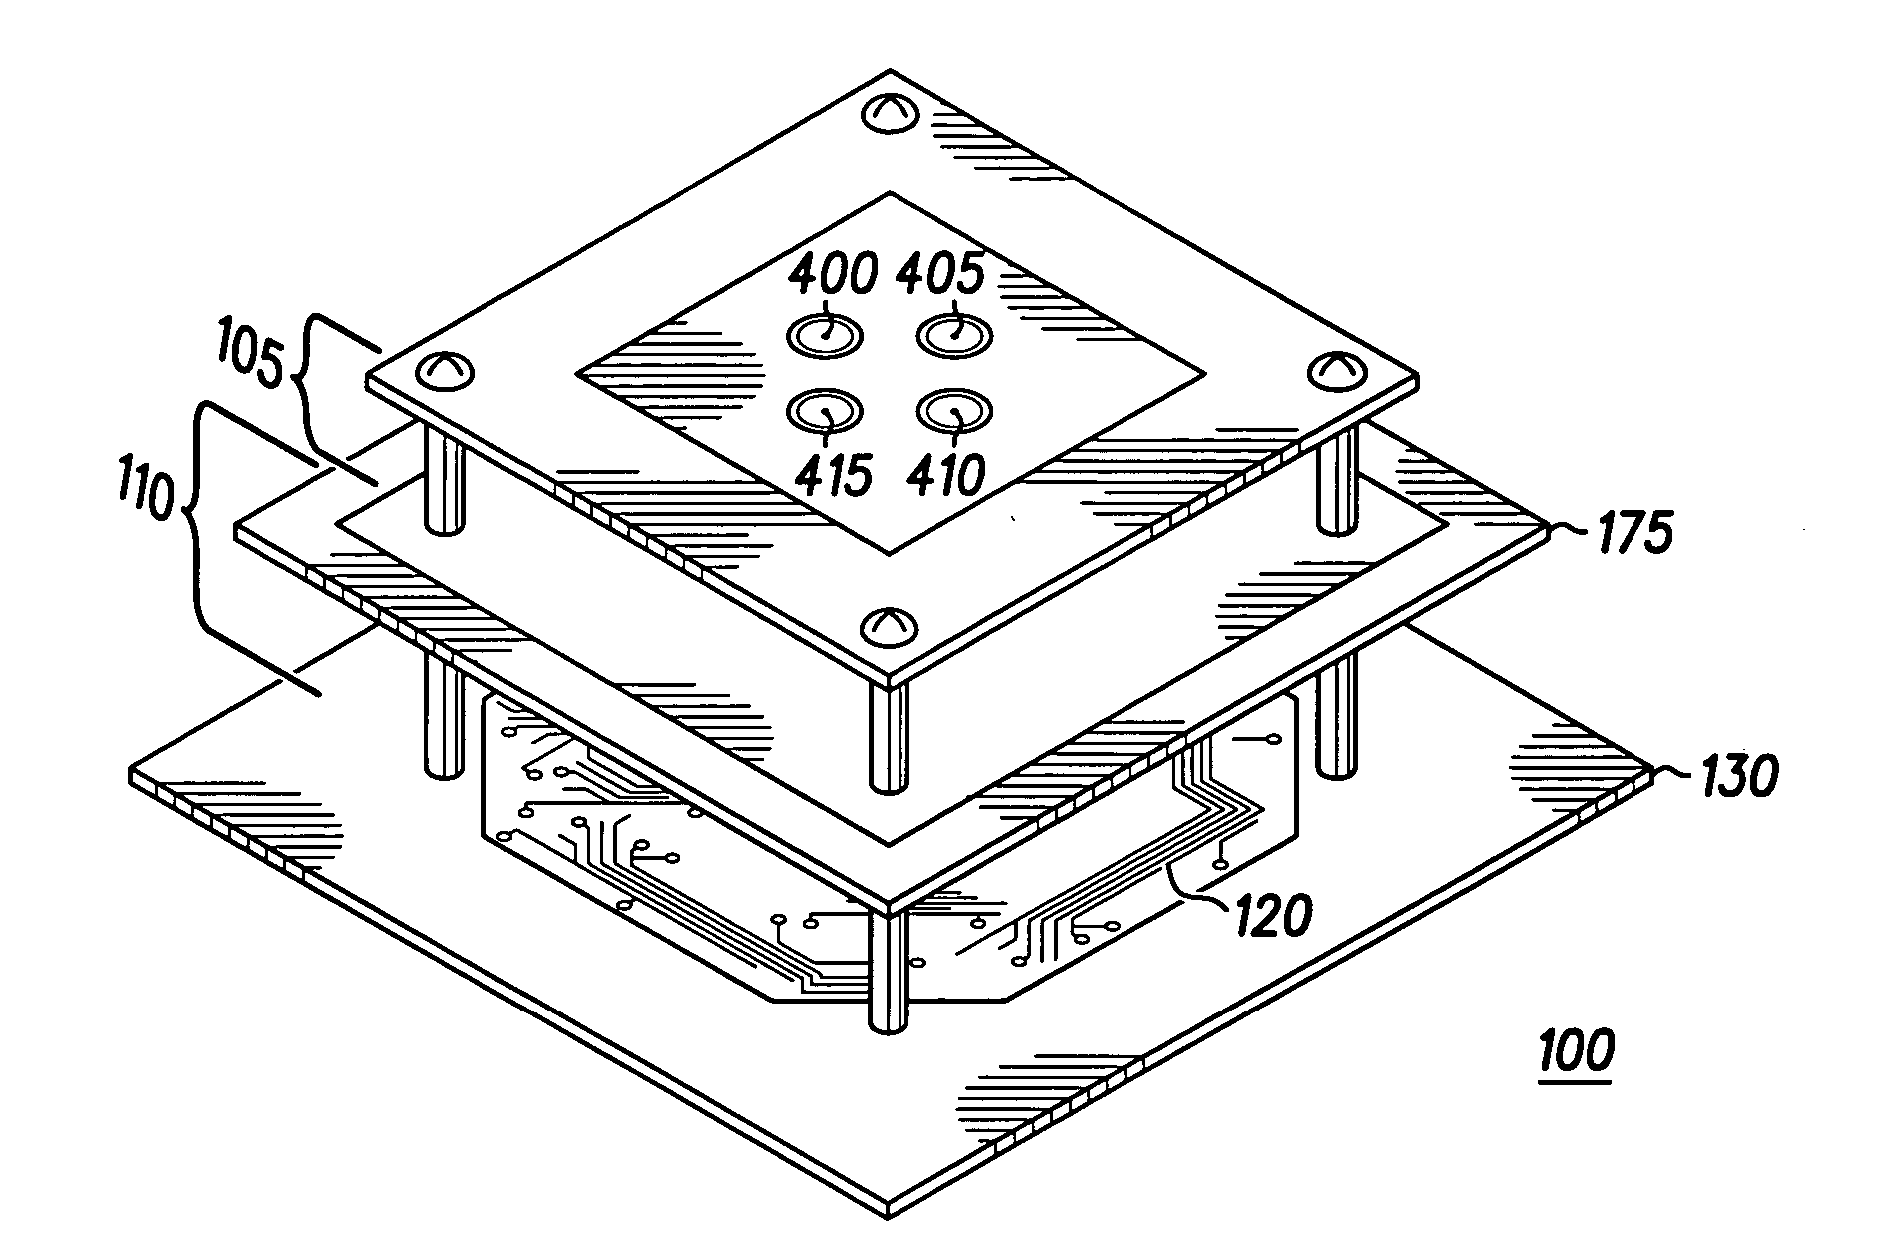 Defferential-fed stacked patch antenna